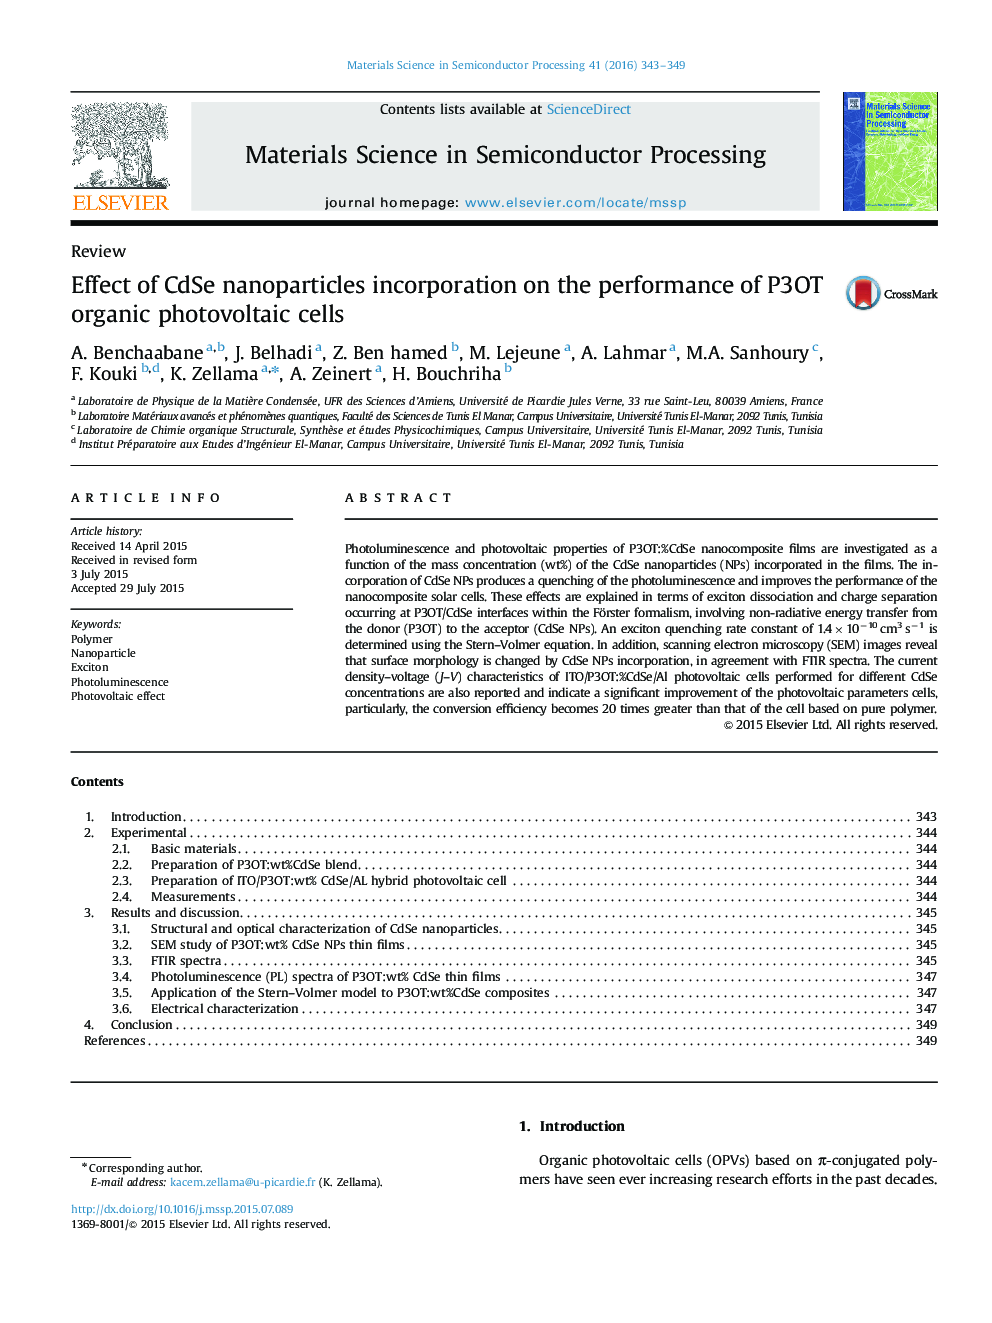 Effect of CdSe nanoparticles incorporation on the performance of P3OT organic photovoltaic cells